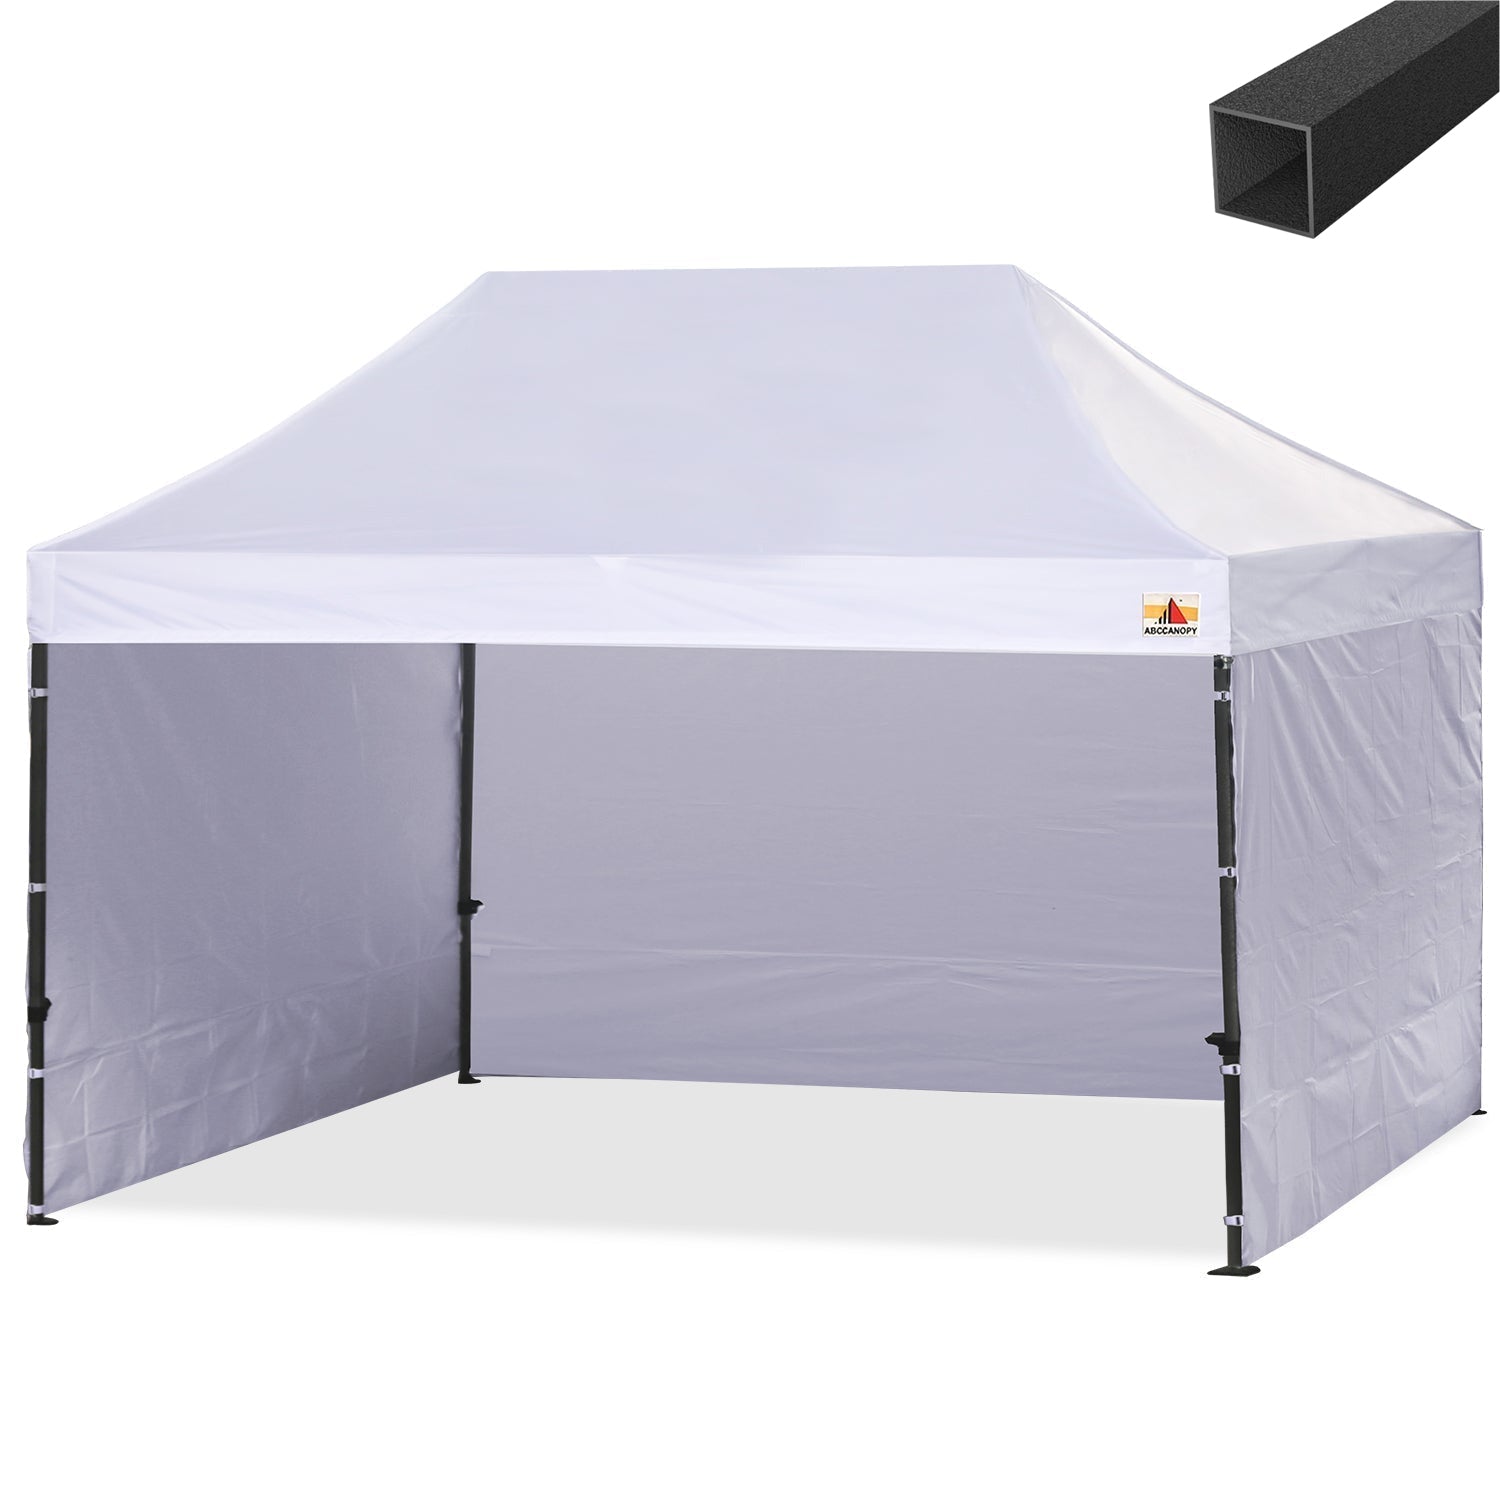 S1 Commercial Pop Up Canopy Tent 10x15 Instant Shelter